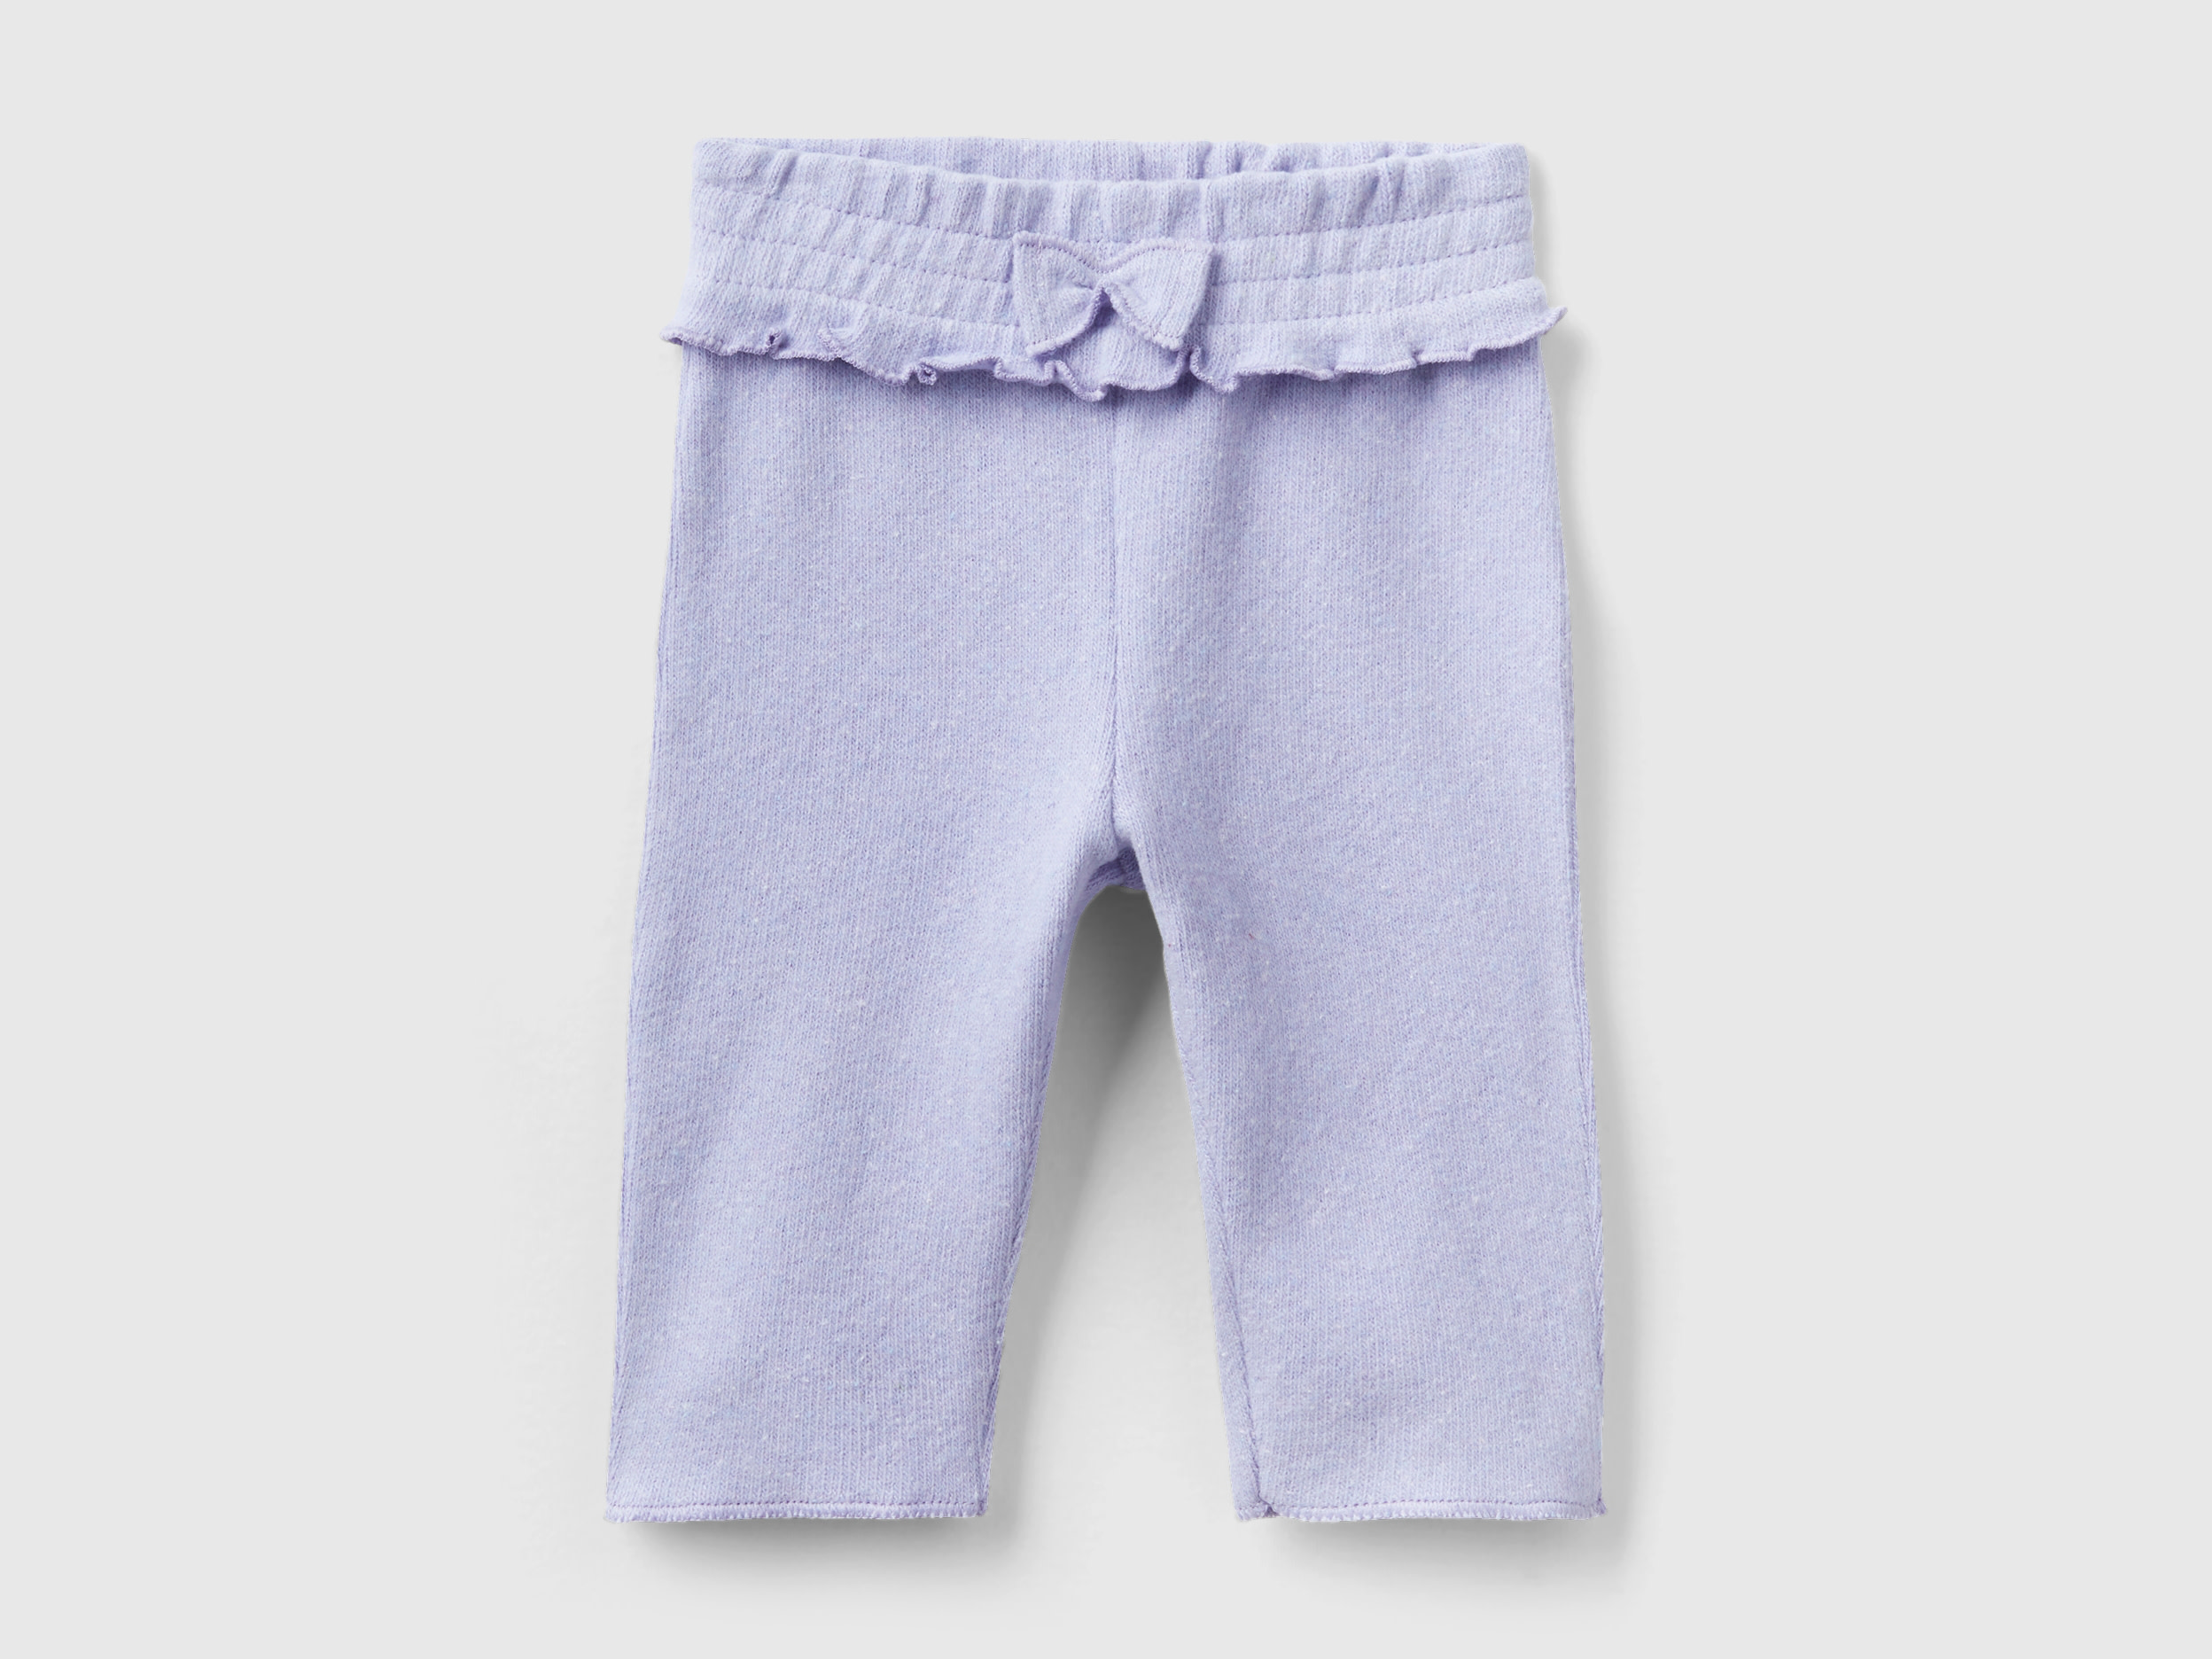 Benetton, Skinny Fit Trousers In Recycled Cotton Blend, size 9-12, Lilac, Kids